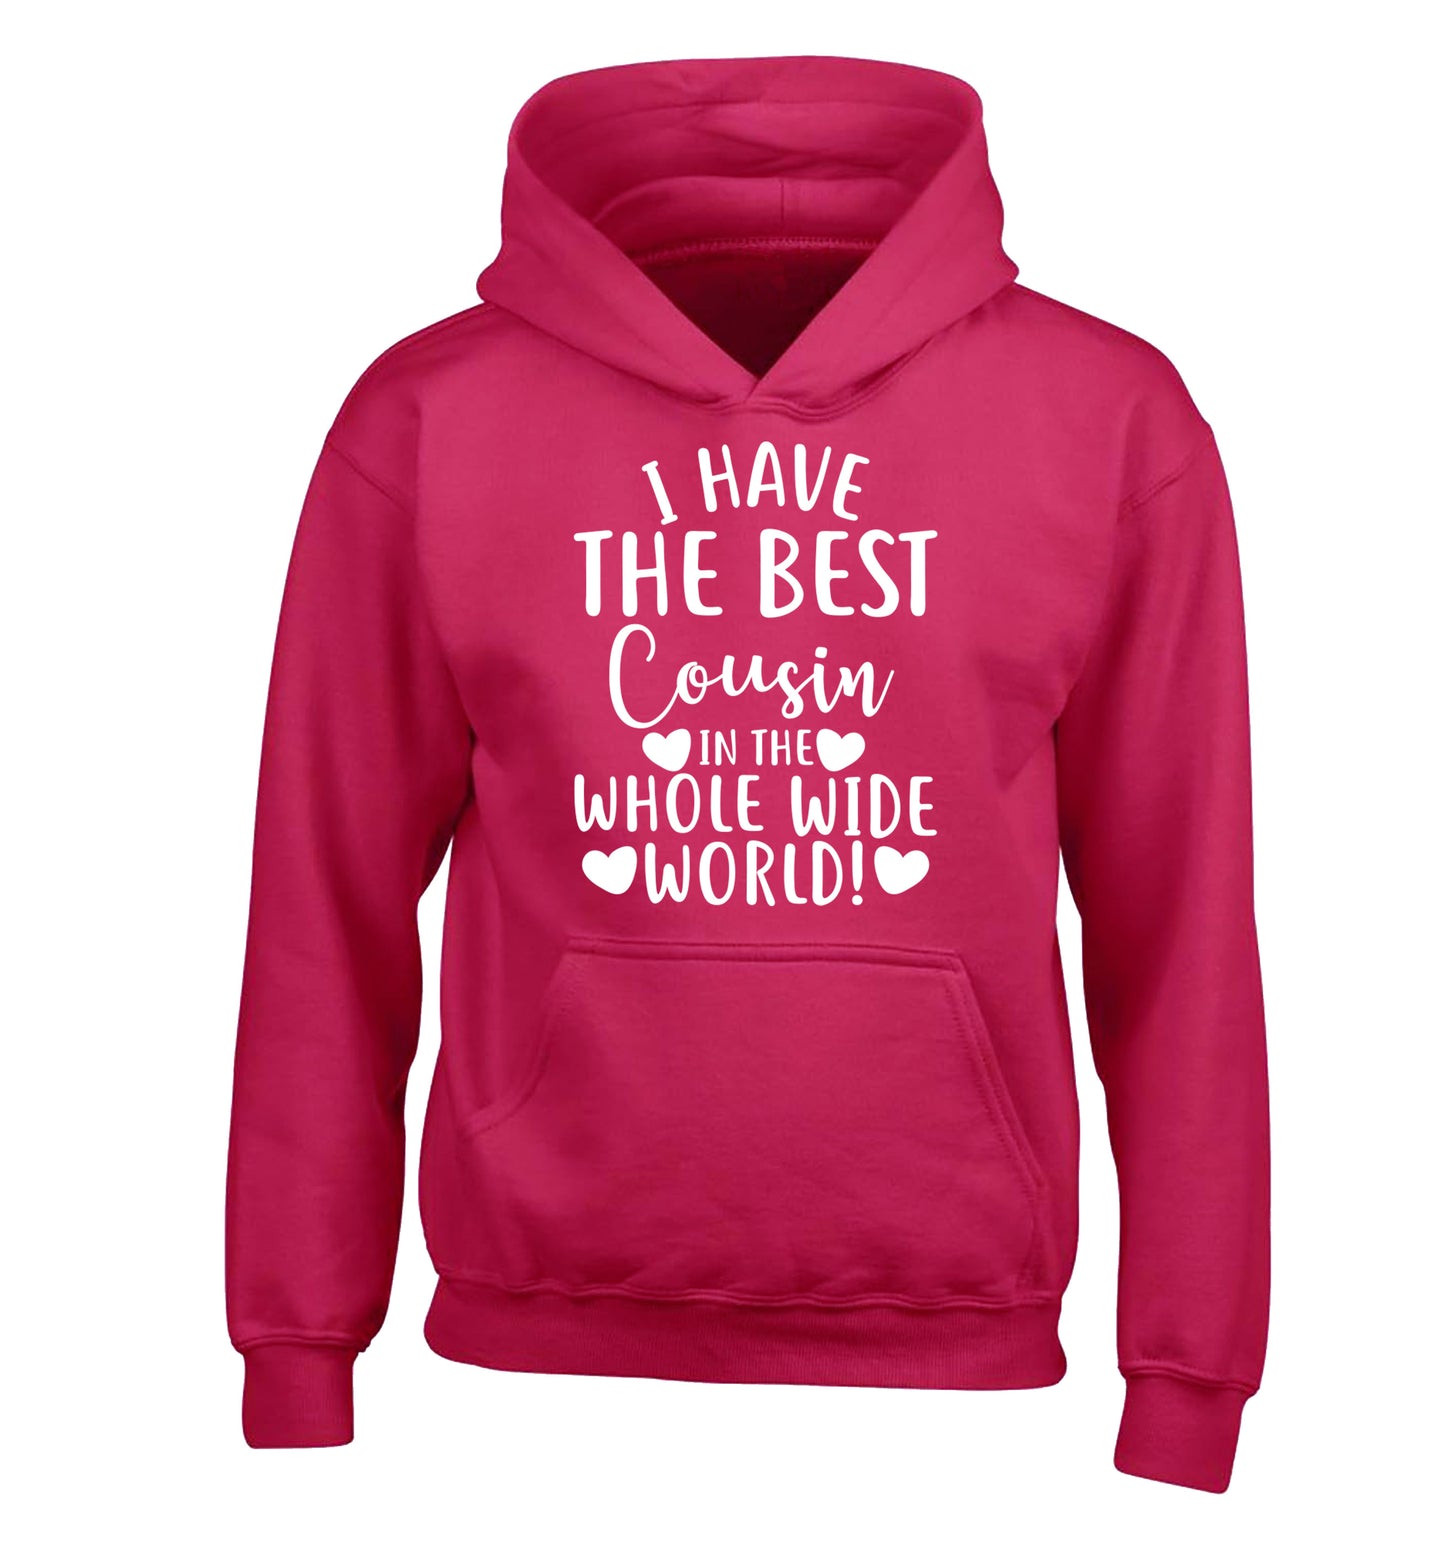 I have the best cousin in the whole wide world! children's pink hoodie 12-13 Years